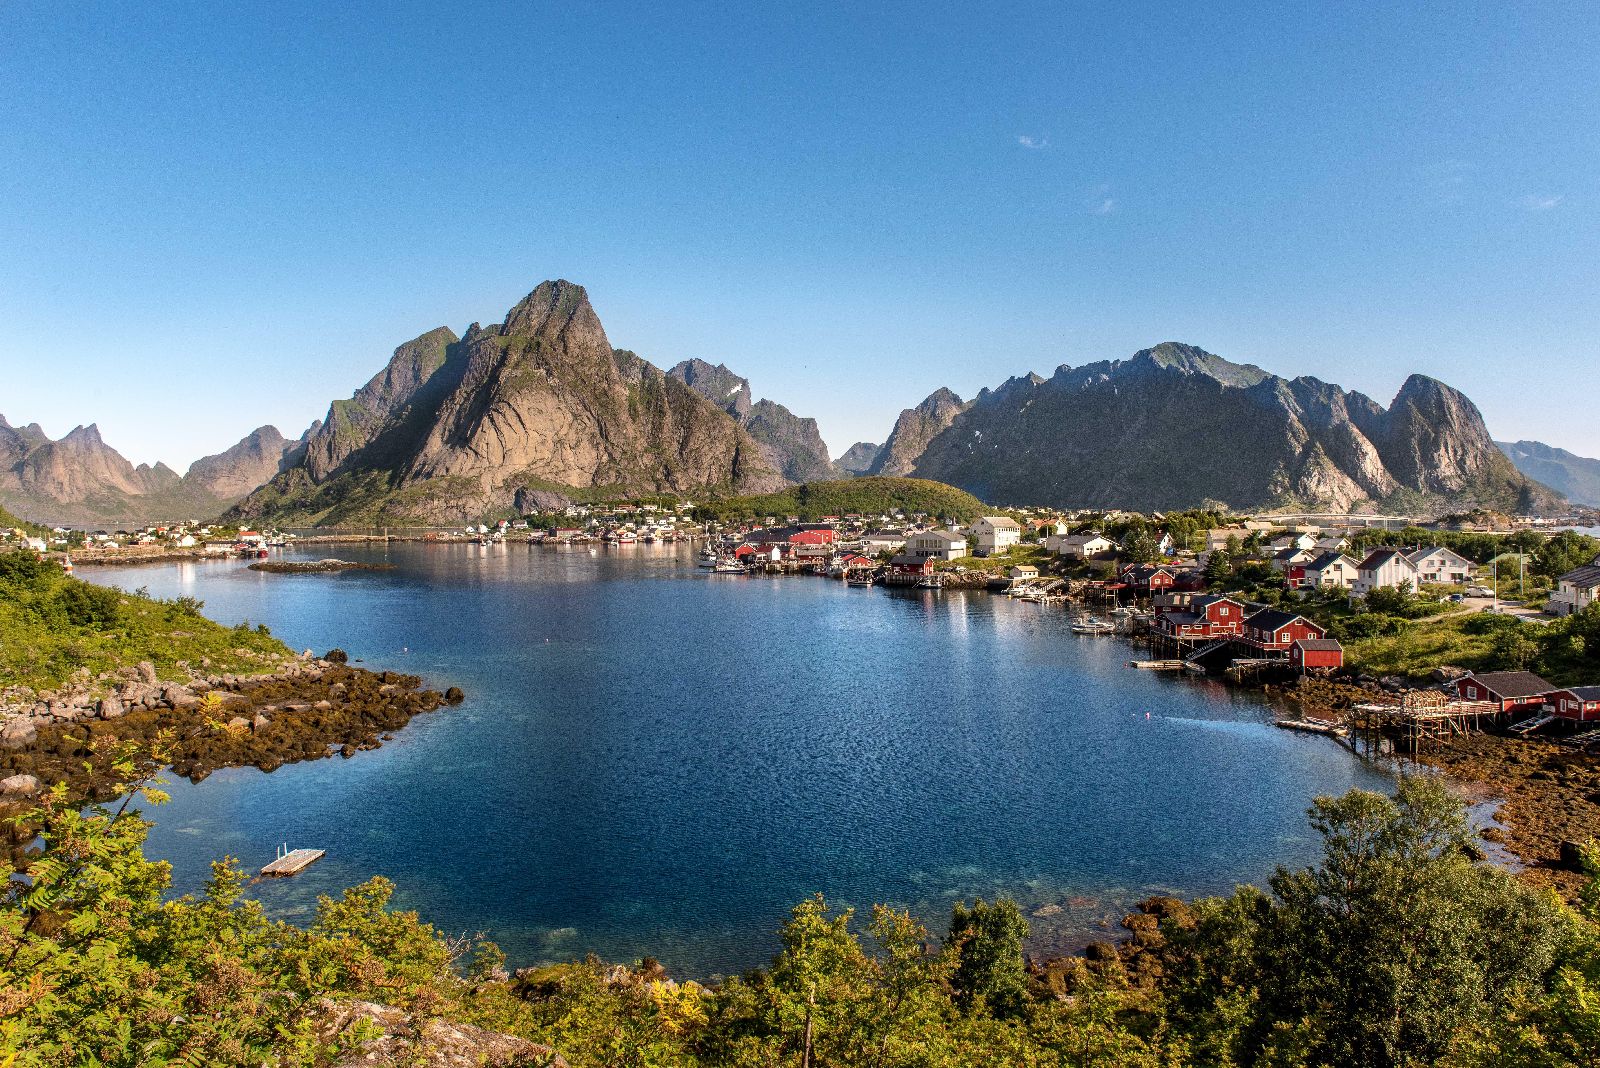 Picturesque bay with mountain backdrop in the Lofoten Islands Norway